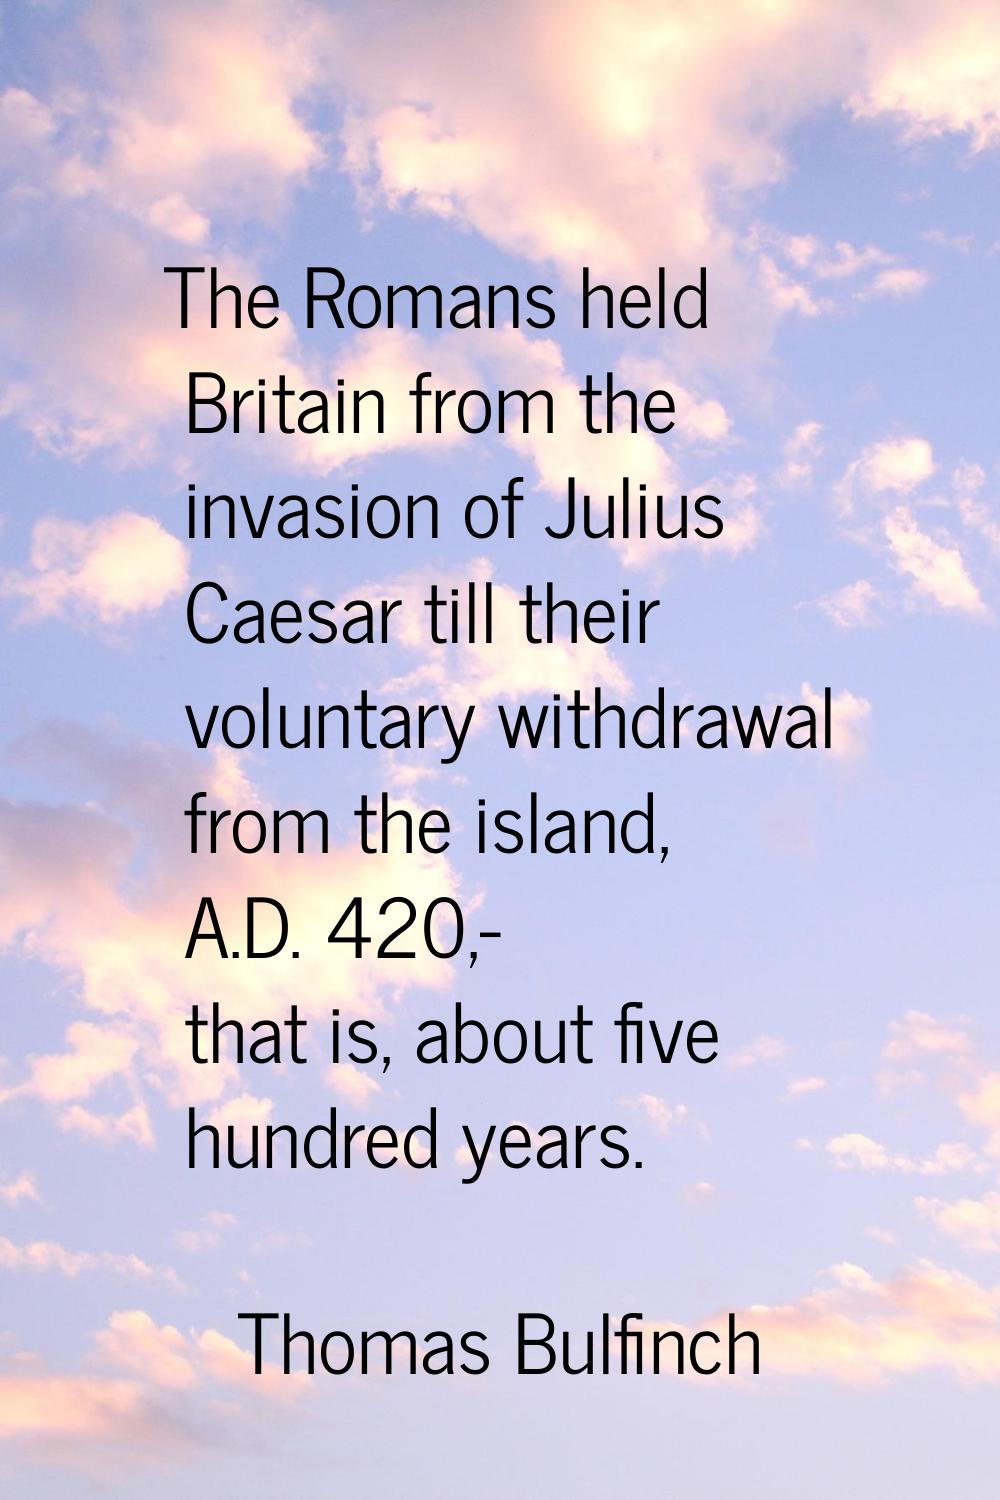 The Romans held Britain from the invasion of Julius Caesar till their voluntary withdrawal from the